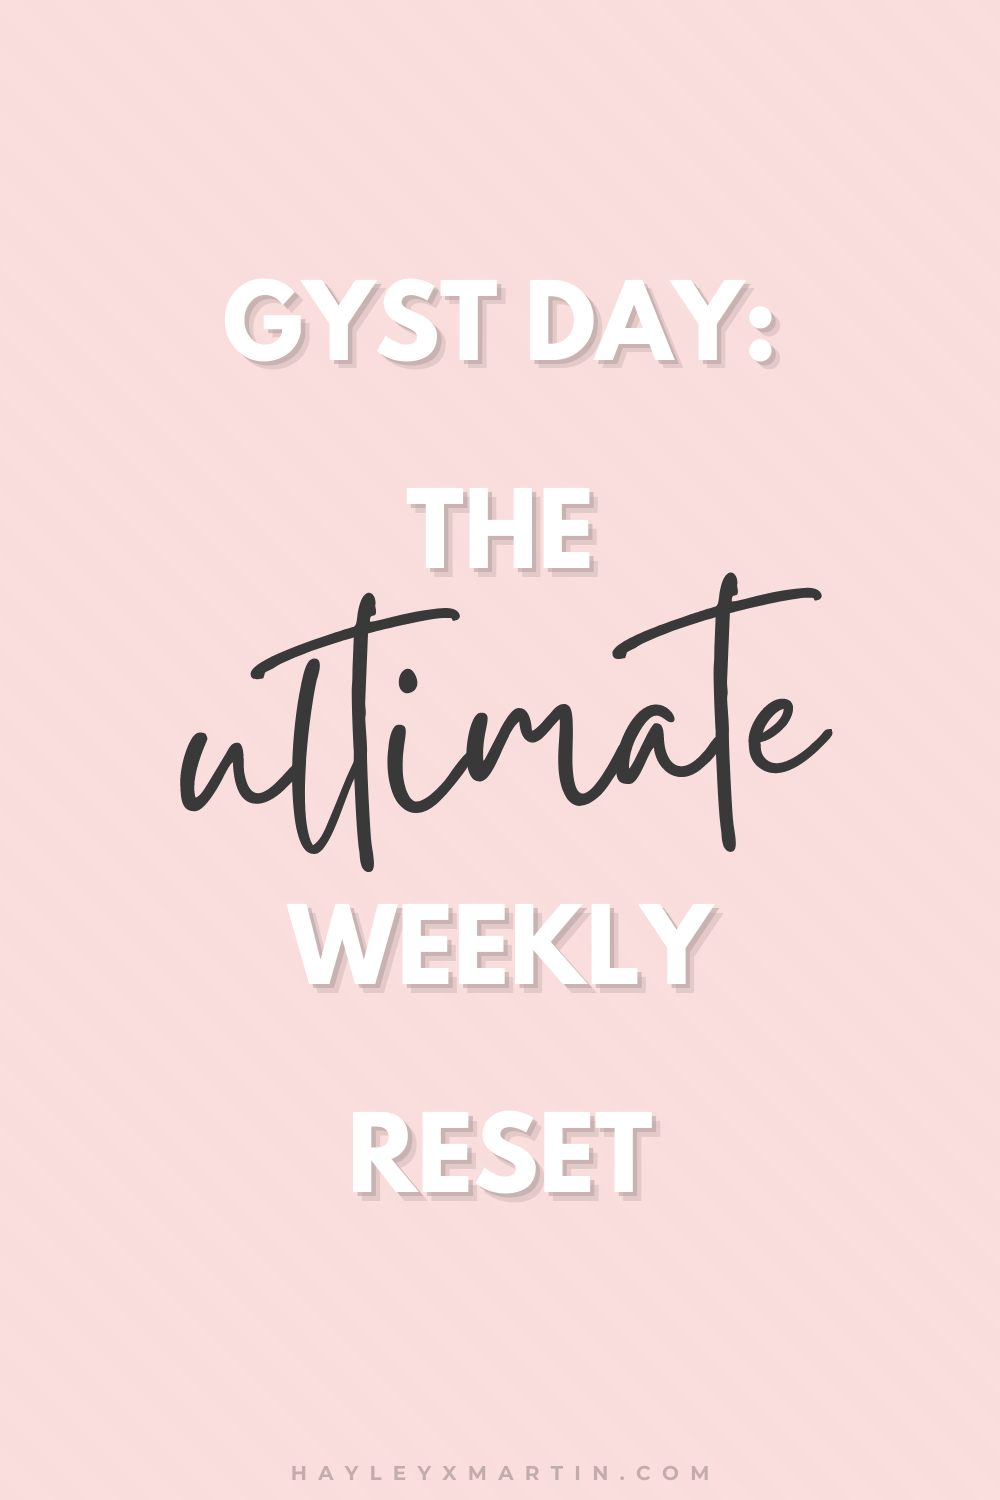 gyst day: THE ULTIMATE WEEKLY RESET